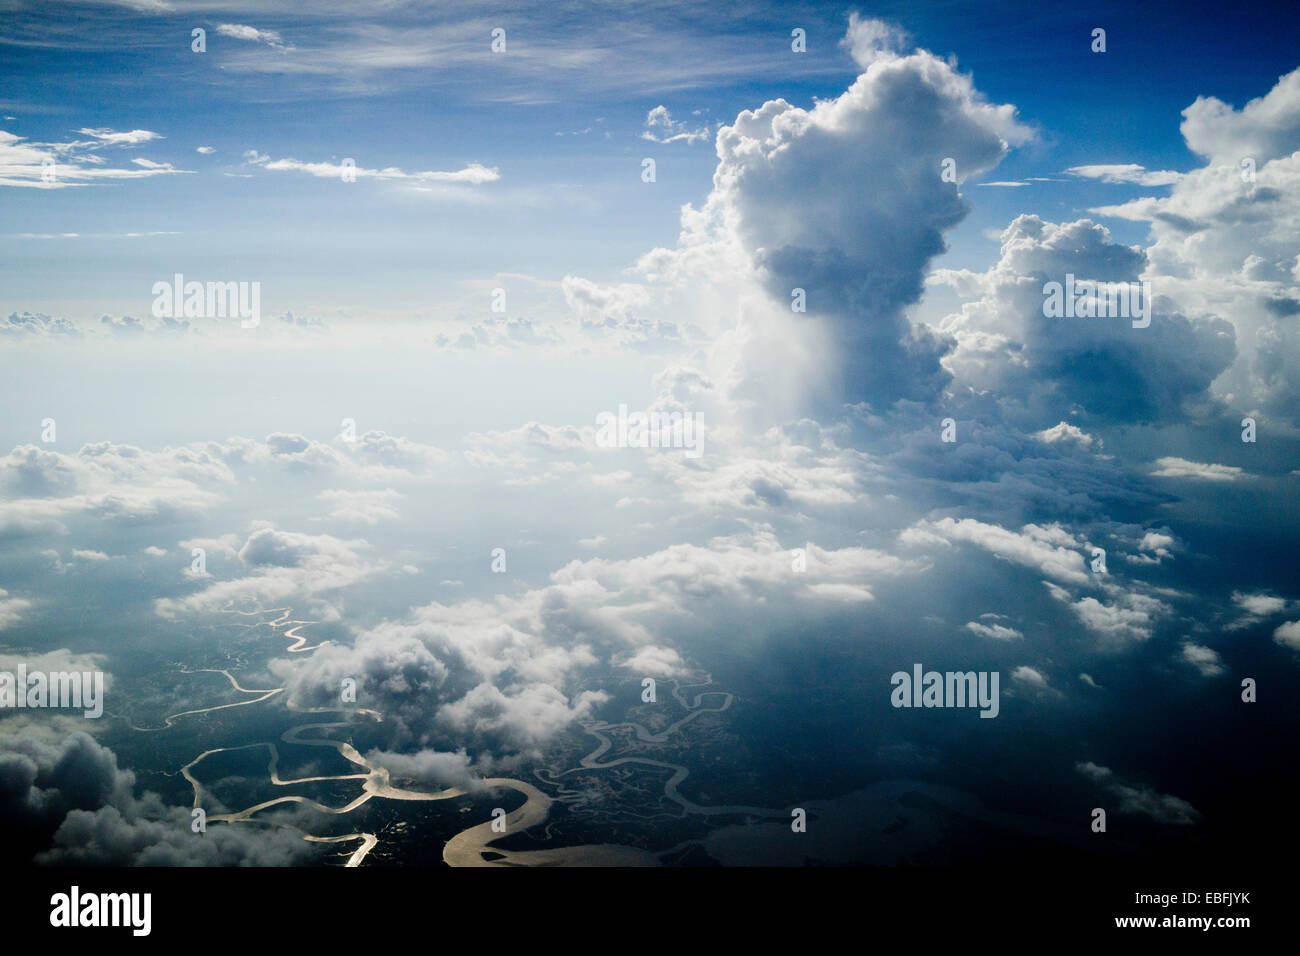 High altitude clouds, cumulus clouds, in color, dramatic photograph. Twisting rivers and streams below in surface. Stock Photo